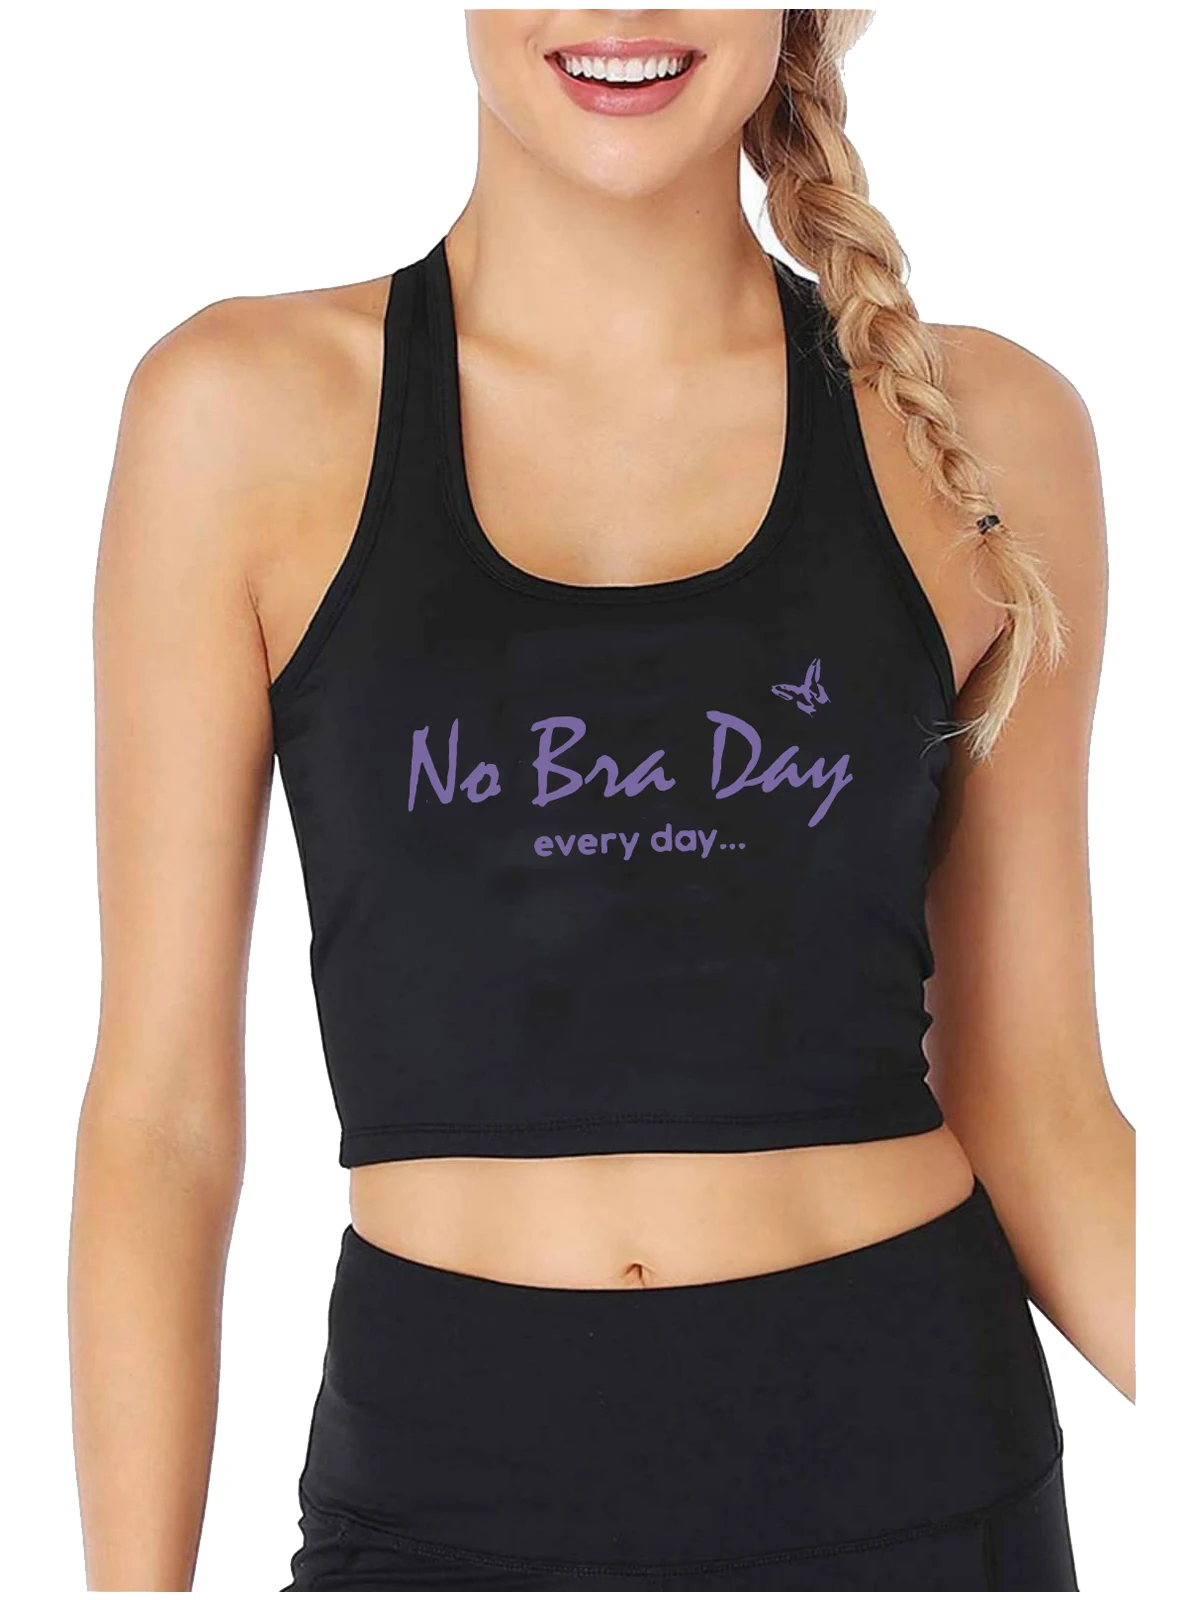 

Every Day Is No Bra Day Design Sexy Slim Fit Crop Top Hotwife Humorous Flirtation Style Tank Tops Feminist Fun Training Camisole